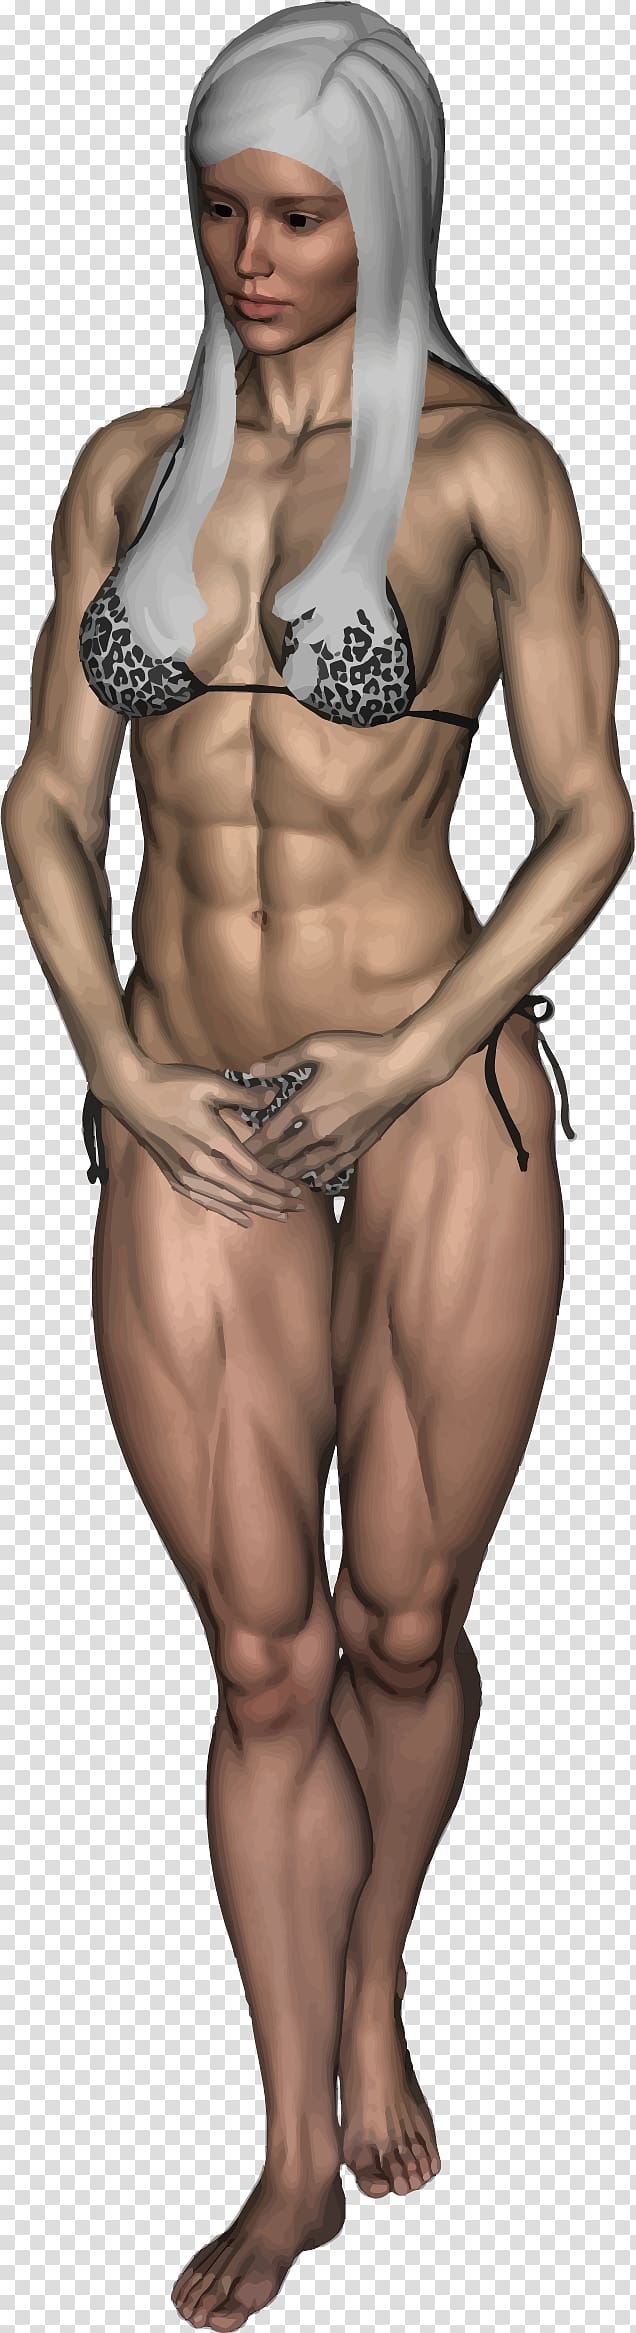 Female bodybuilding Weight training Muscle Fitness and figure competition, bodybuilding transparent background PNG clipart